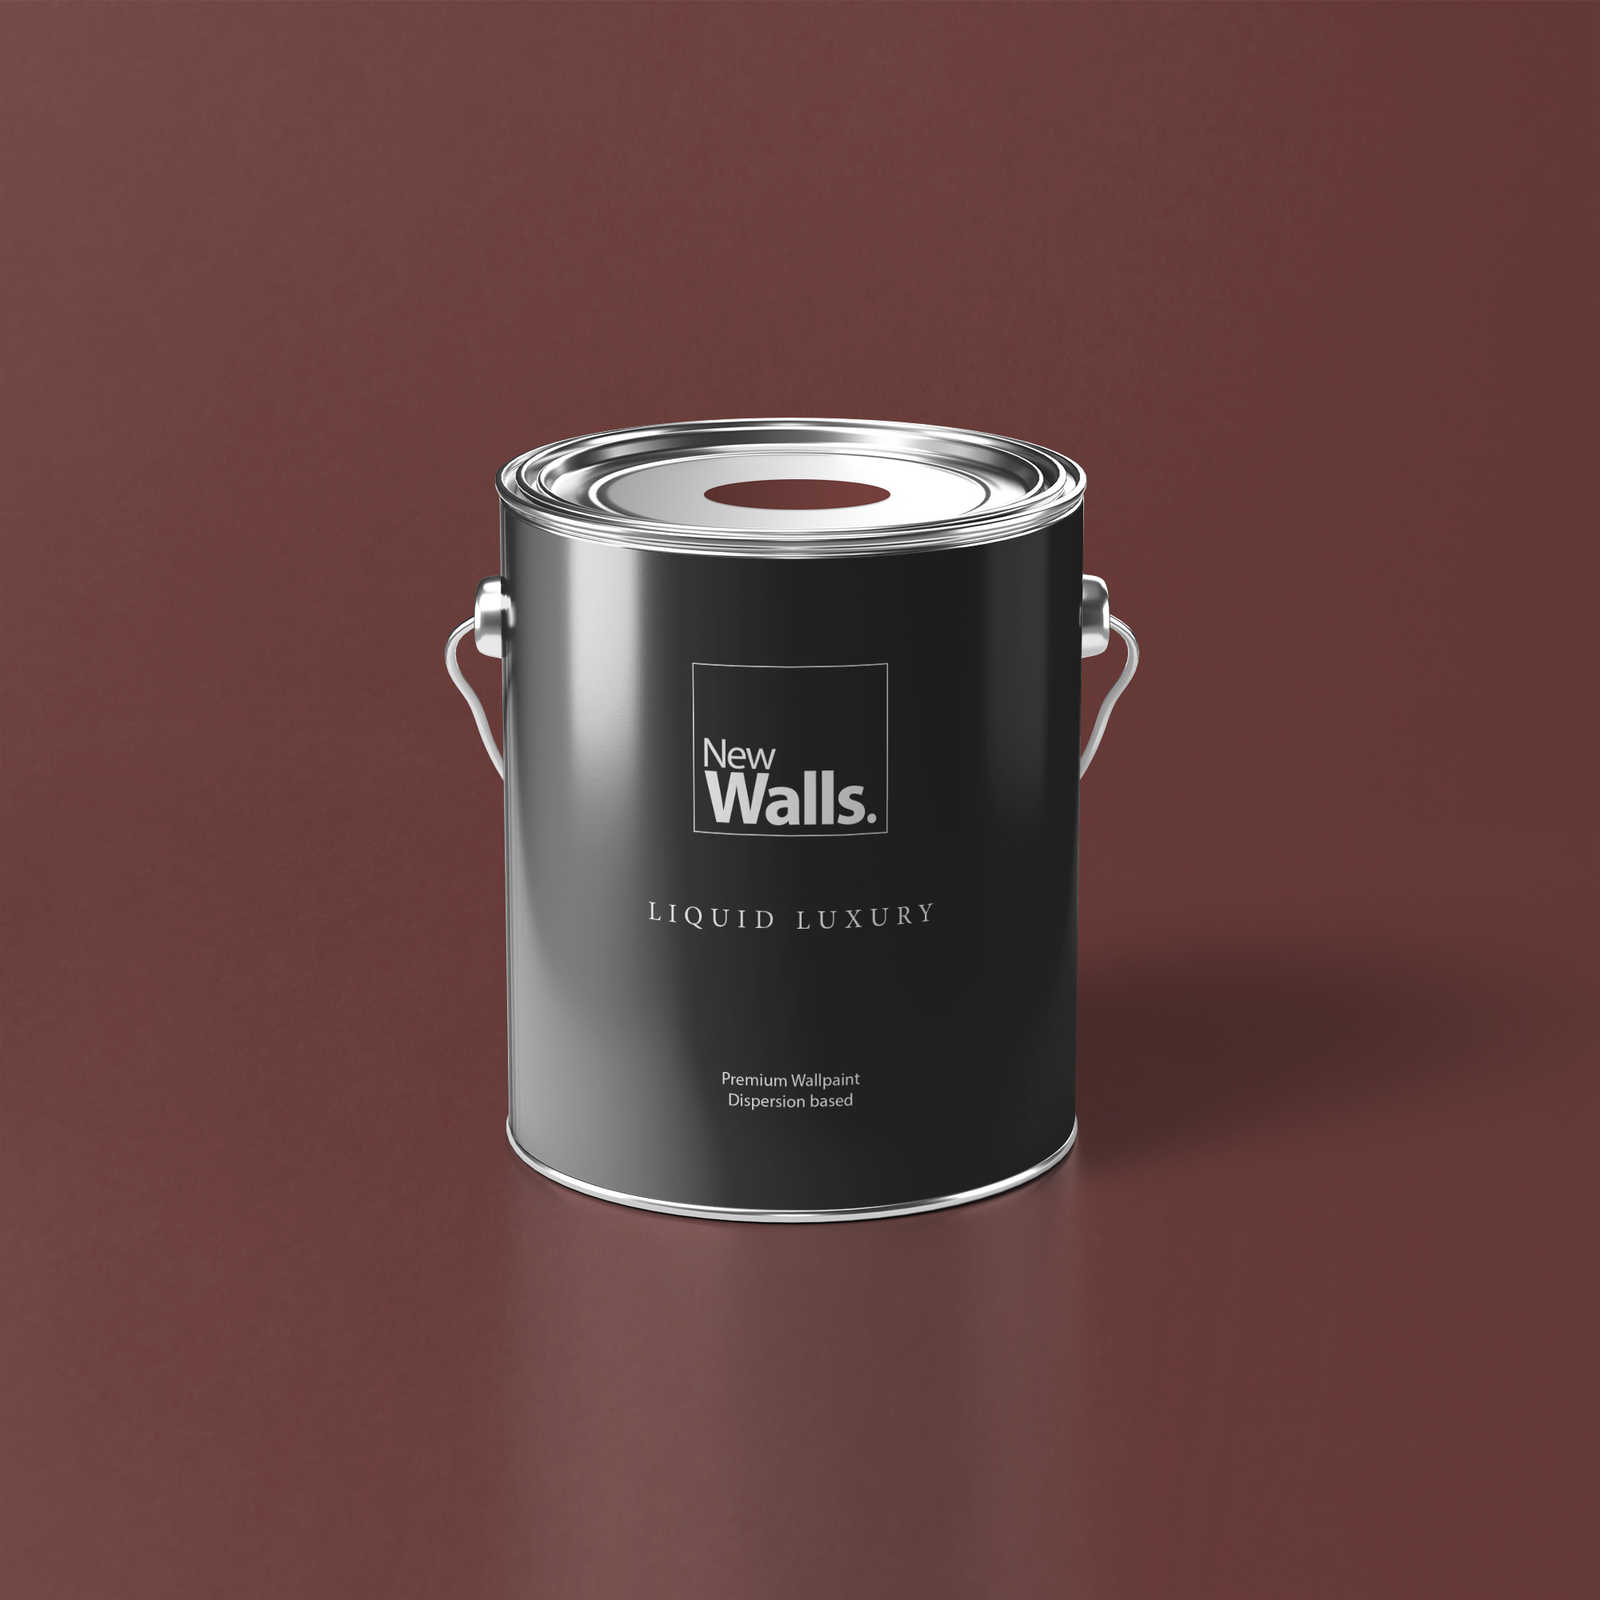 Premium Wall Paint noble chestnut red »Luxury Lipstick« NW1007 – 5 litre
